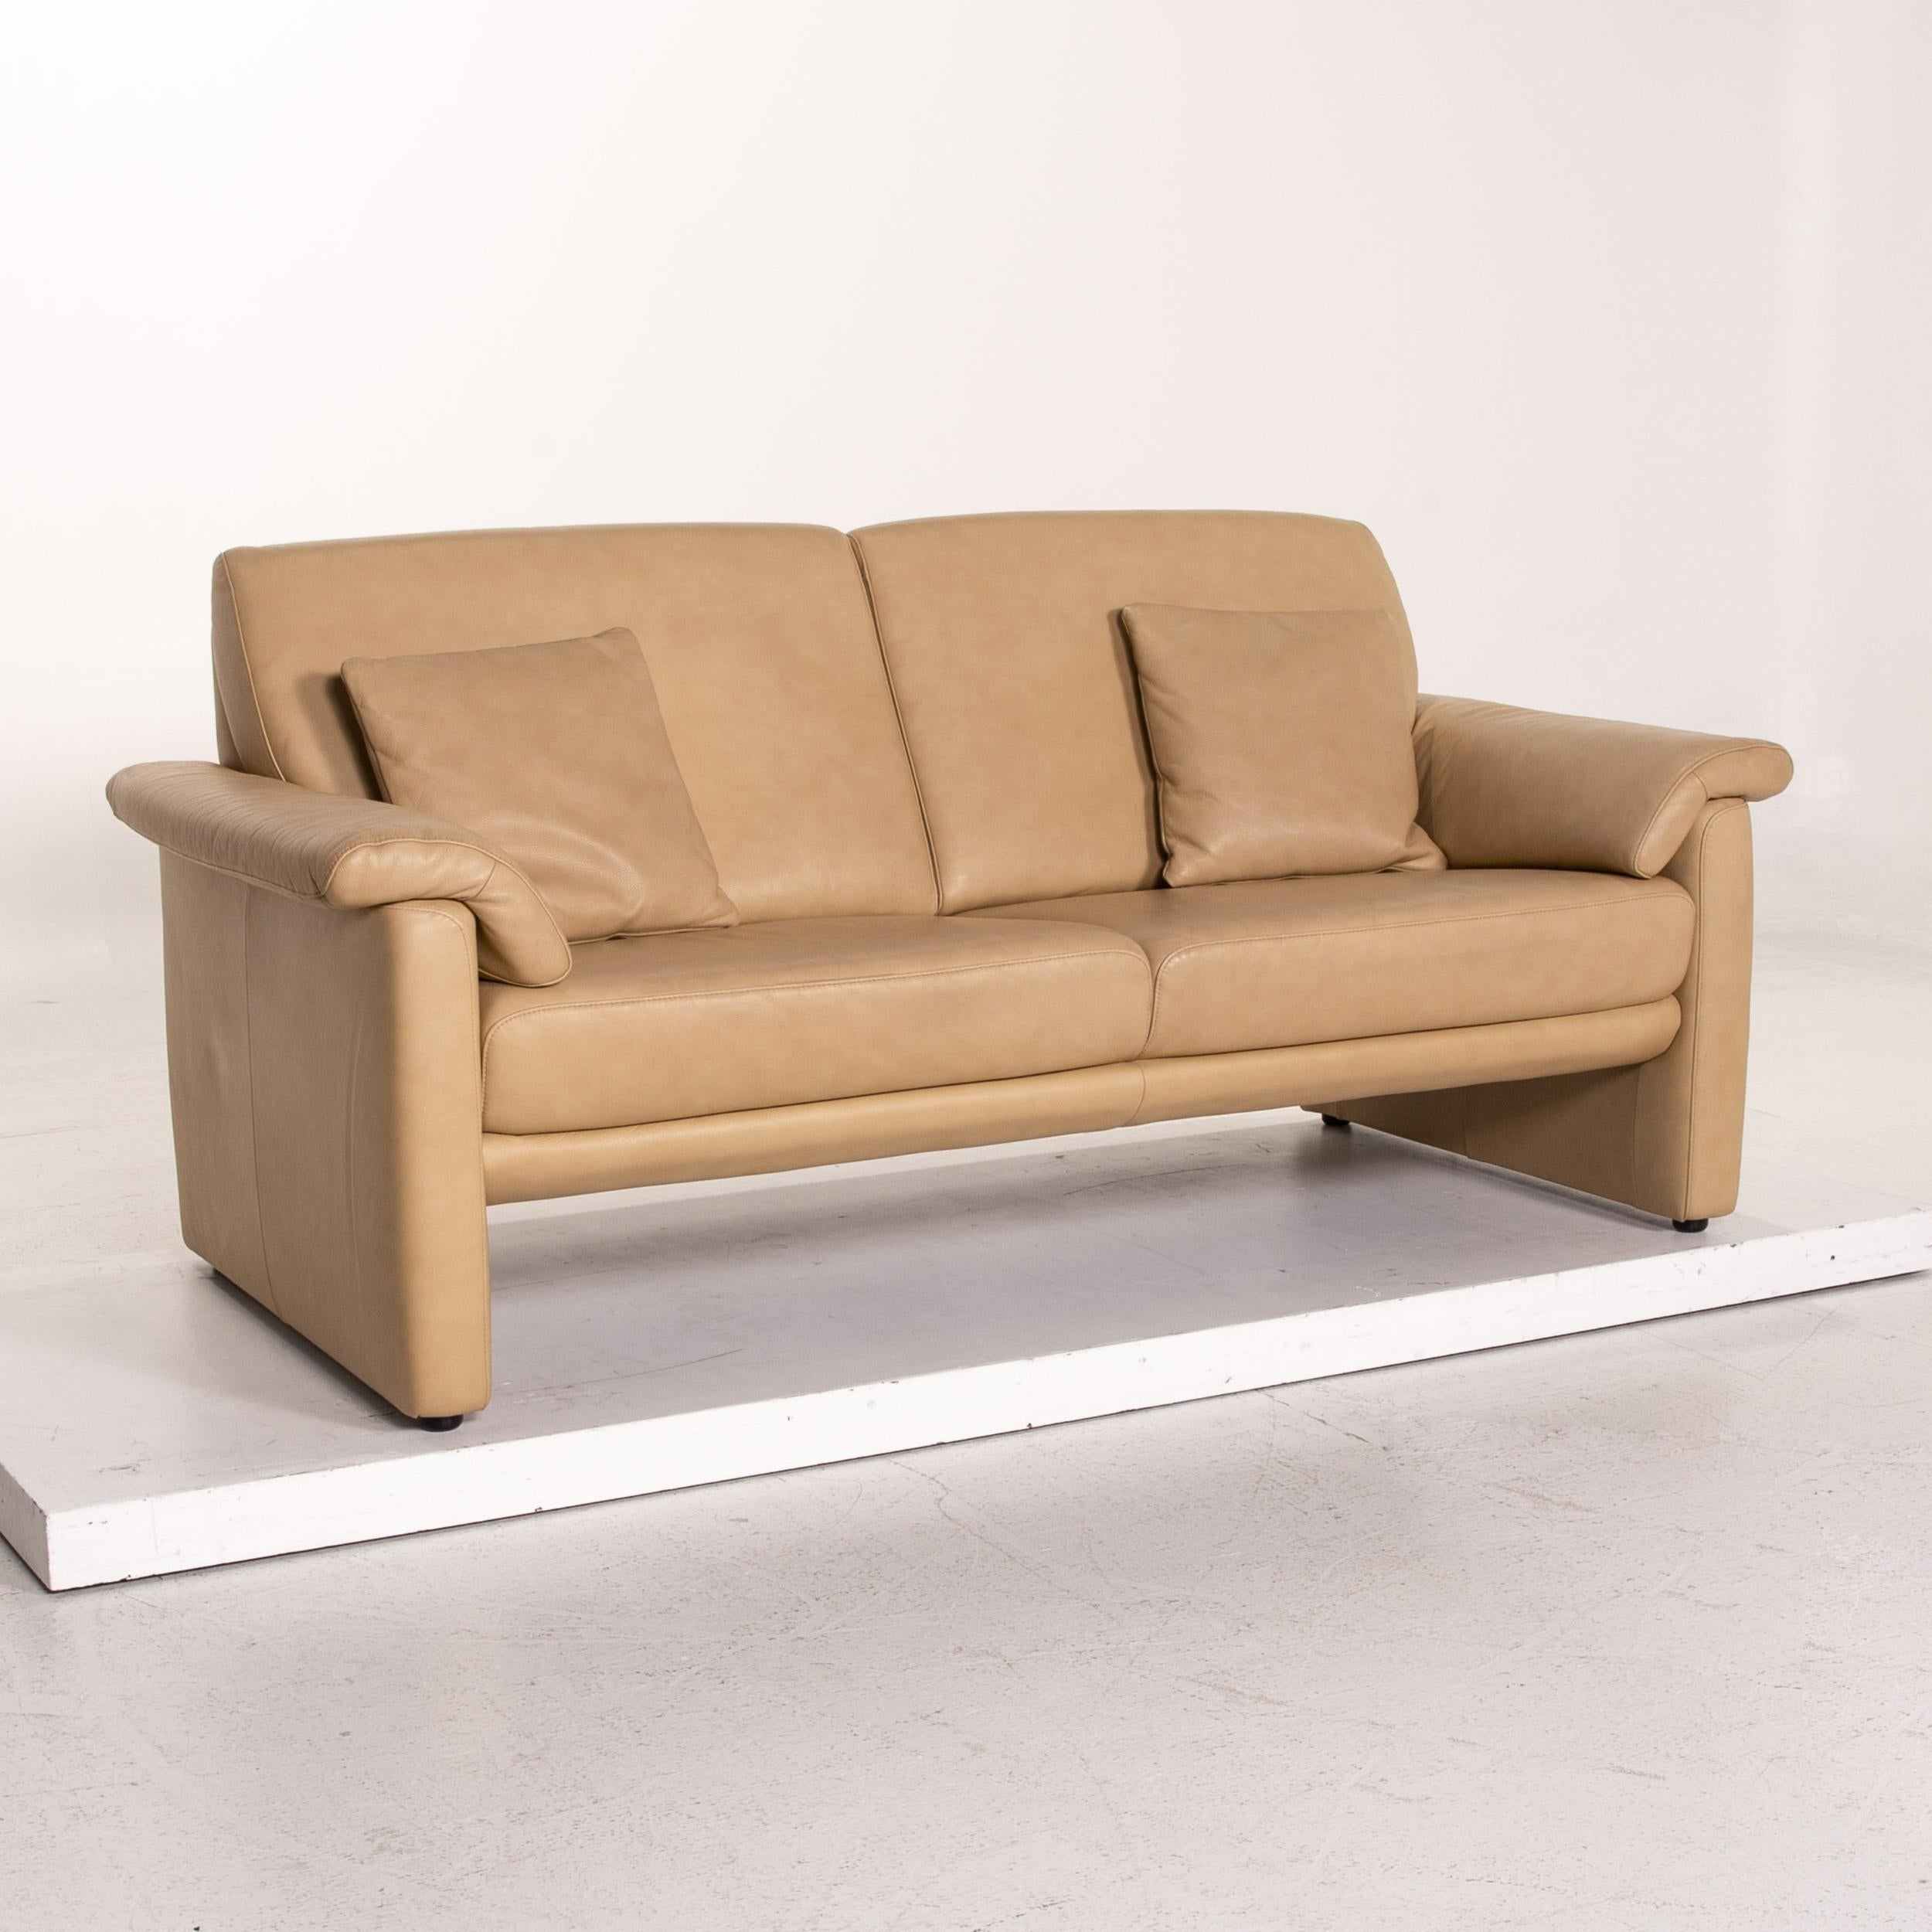 Contemporary Willi Schillig Lucca Leather Sofa Beige Two-Seat Couch